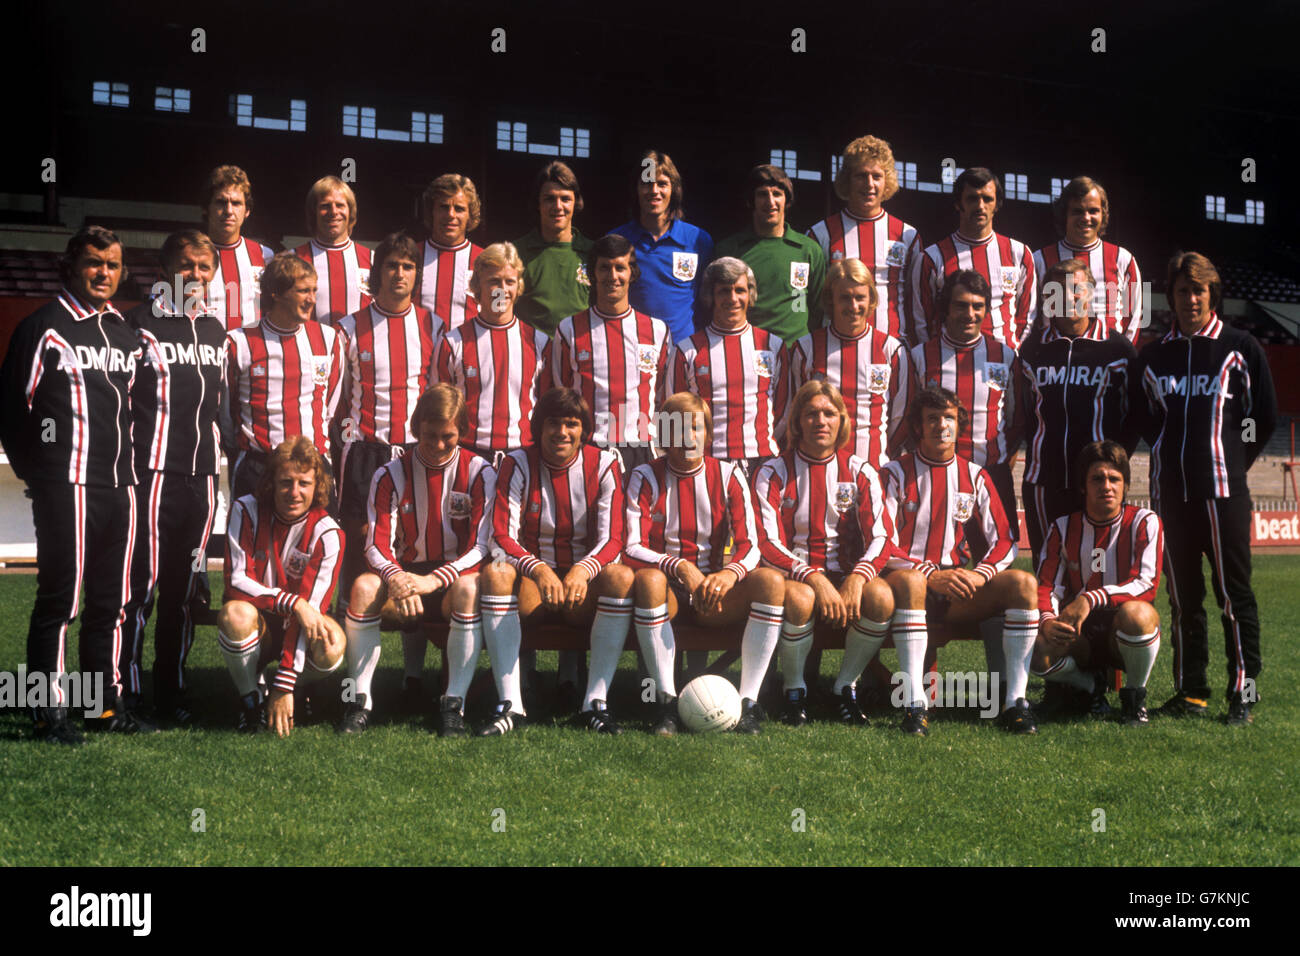 Sheffield United squad for the 1975/76 season. Back row (l-r): Steve Goulding, Ted Hemsley, Terry Garbett, Stephen Conroy, Tom McAlister, Jim Brown, Steve Faulkner, Eddie Colquhoun and Colin Franks. Middle row: Alan Hodgkinson (coach), Ken Furphy (manager), Len Badger, Paul Nugent, Roy Hill, John Flynn, Alan Woodward, Steve Cammack, Tony Field, Cec Goldwell (coach) and David Turner (youth coach). Front row: David Bradford, Mick Speight, Chris Guthrie, Keith Eddy, Tony Currie, Bill Dearden and Stephen Ludlam. Stock Photo